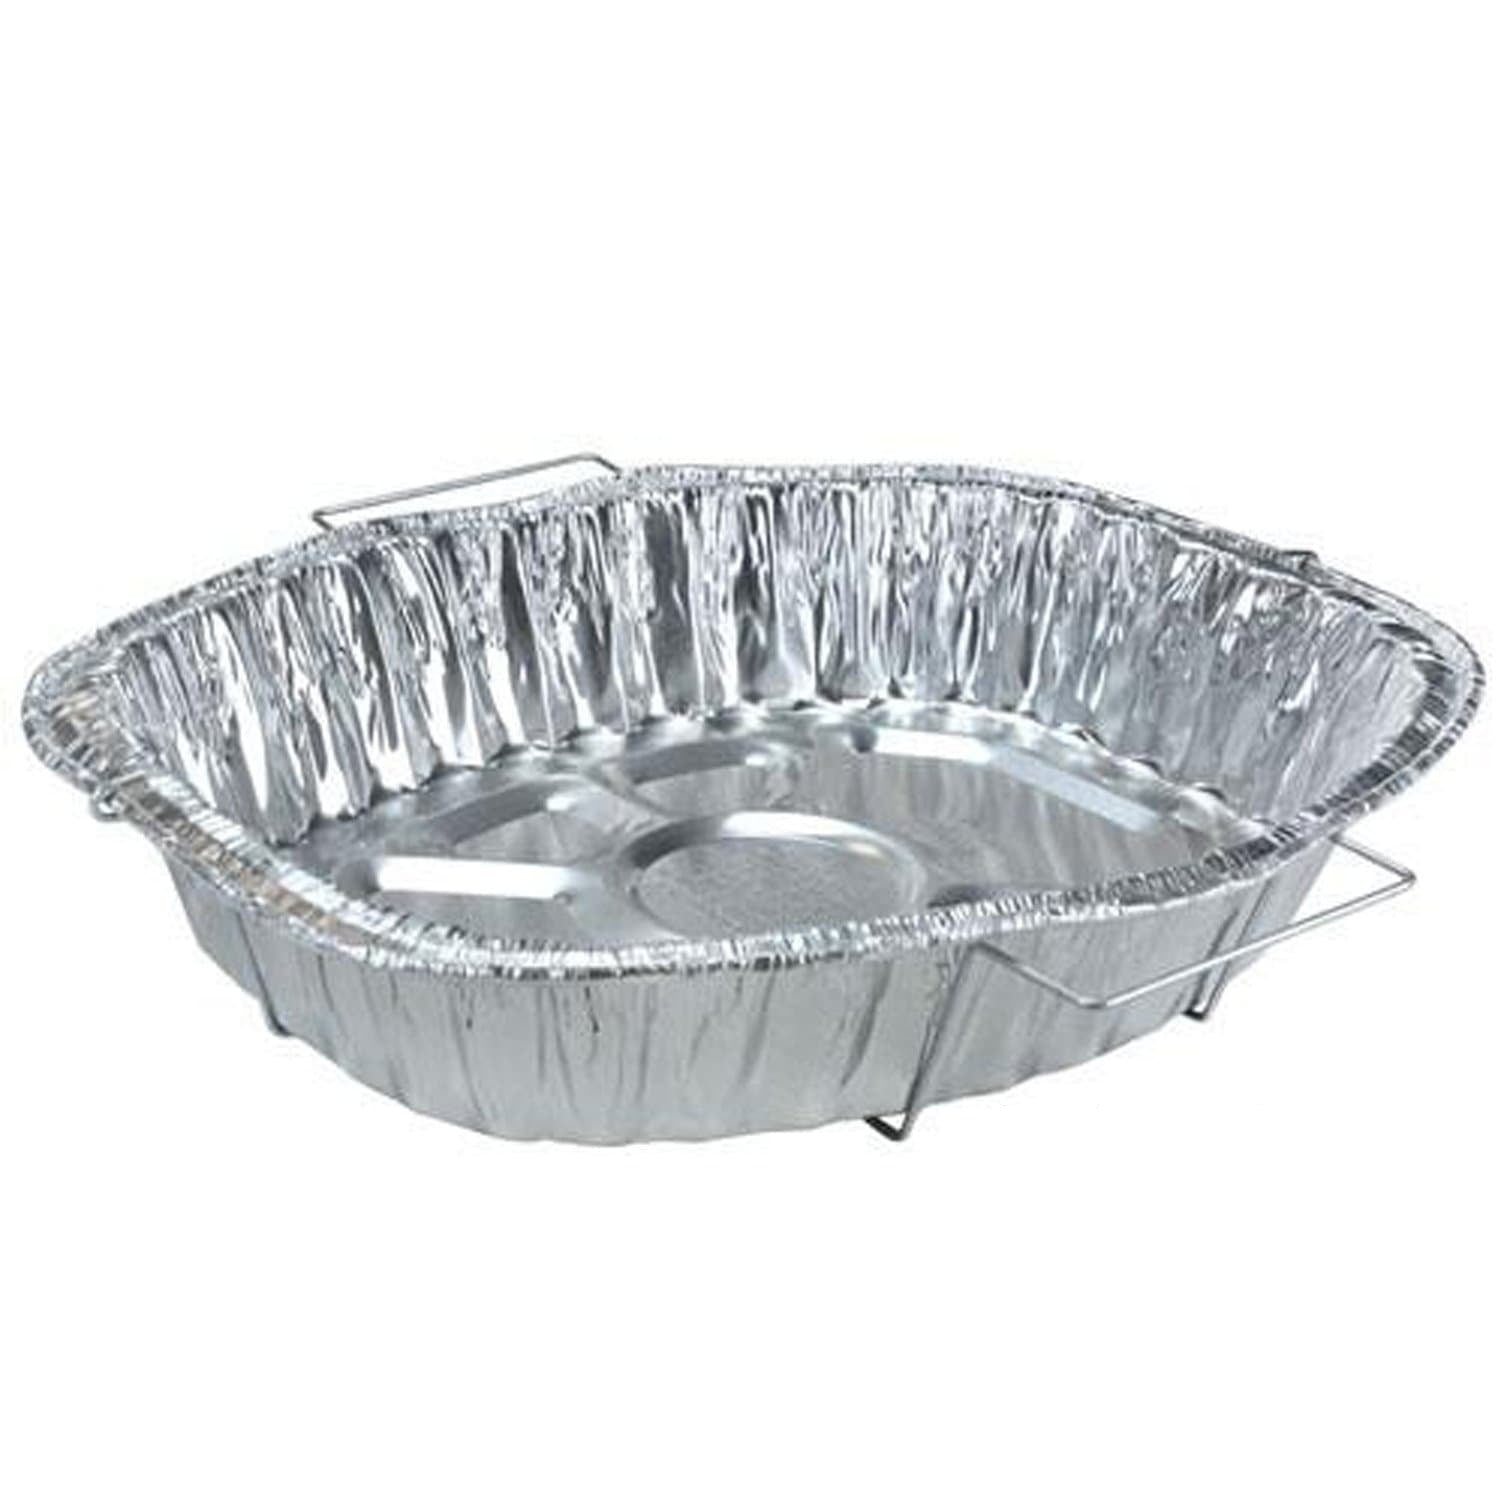 Durable Disposable Aluminum Foil Steam Roaster Baking Pans, Deep, Heavy  Duty Baking Roasting Broiling 21 x 13 x 3.5 inches Thanksgiving Turkey  Dinner 15 15 